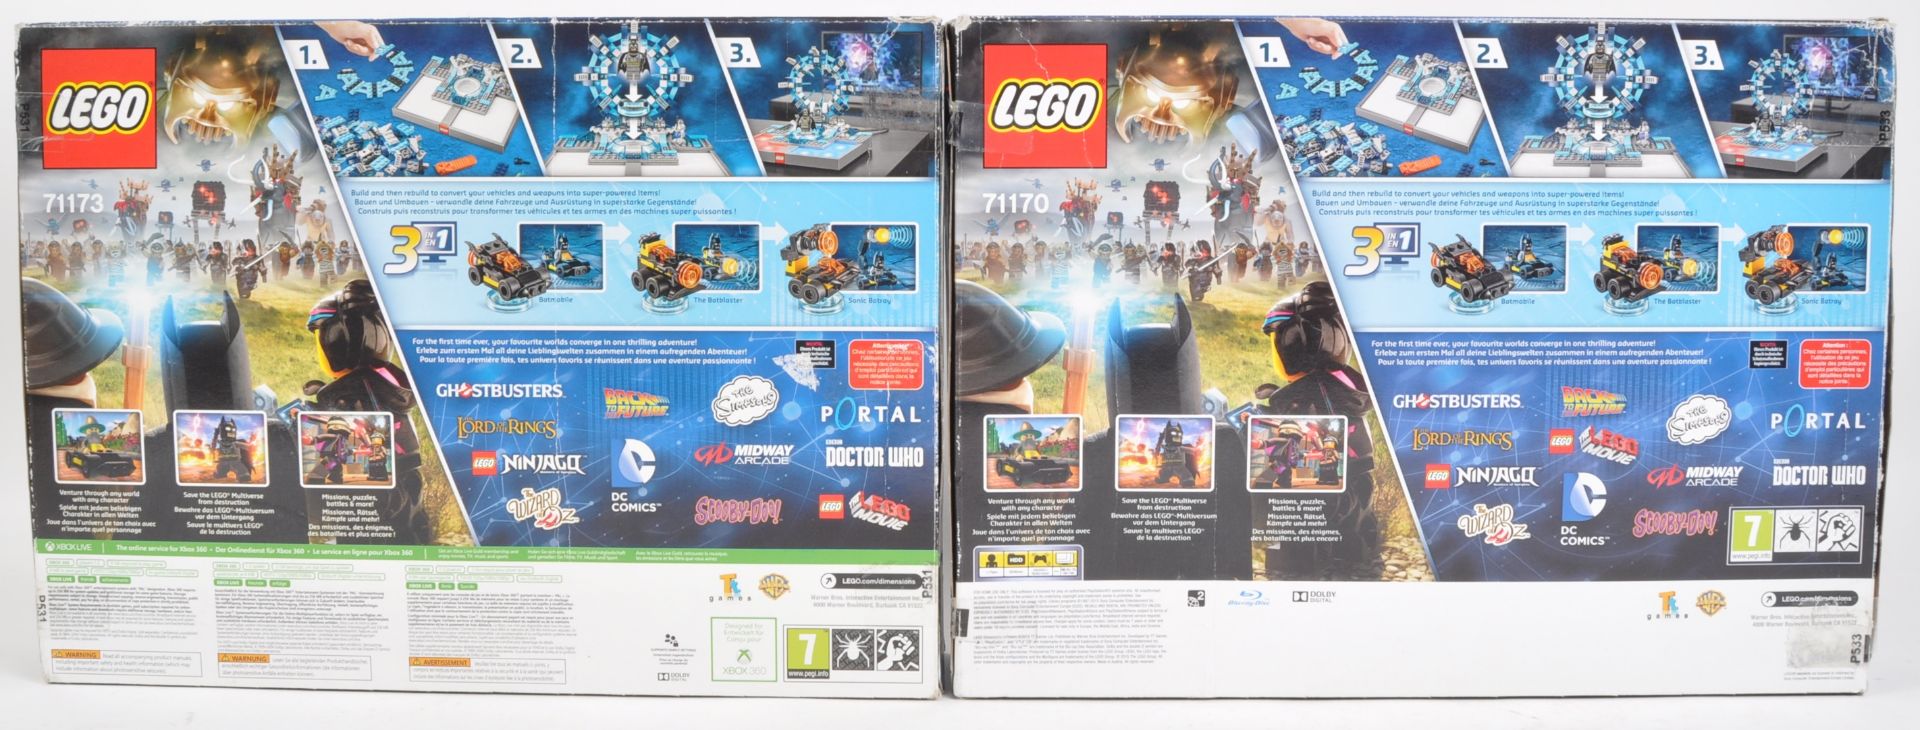 LEGO SETS - LEGO DIMENSIONS - 71170 / 71173 - Image 2 of 6